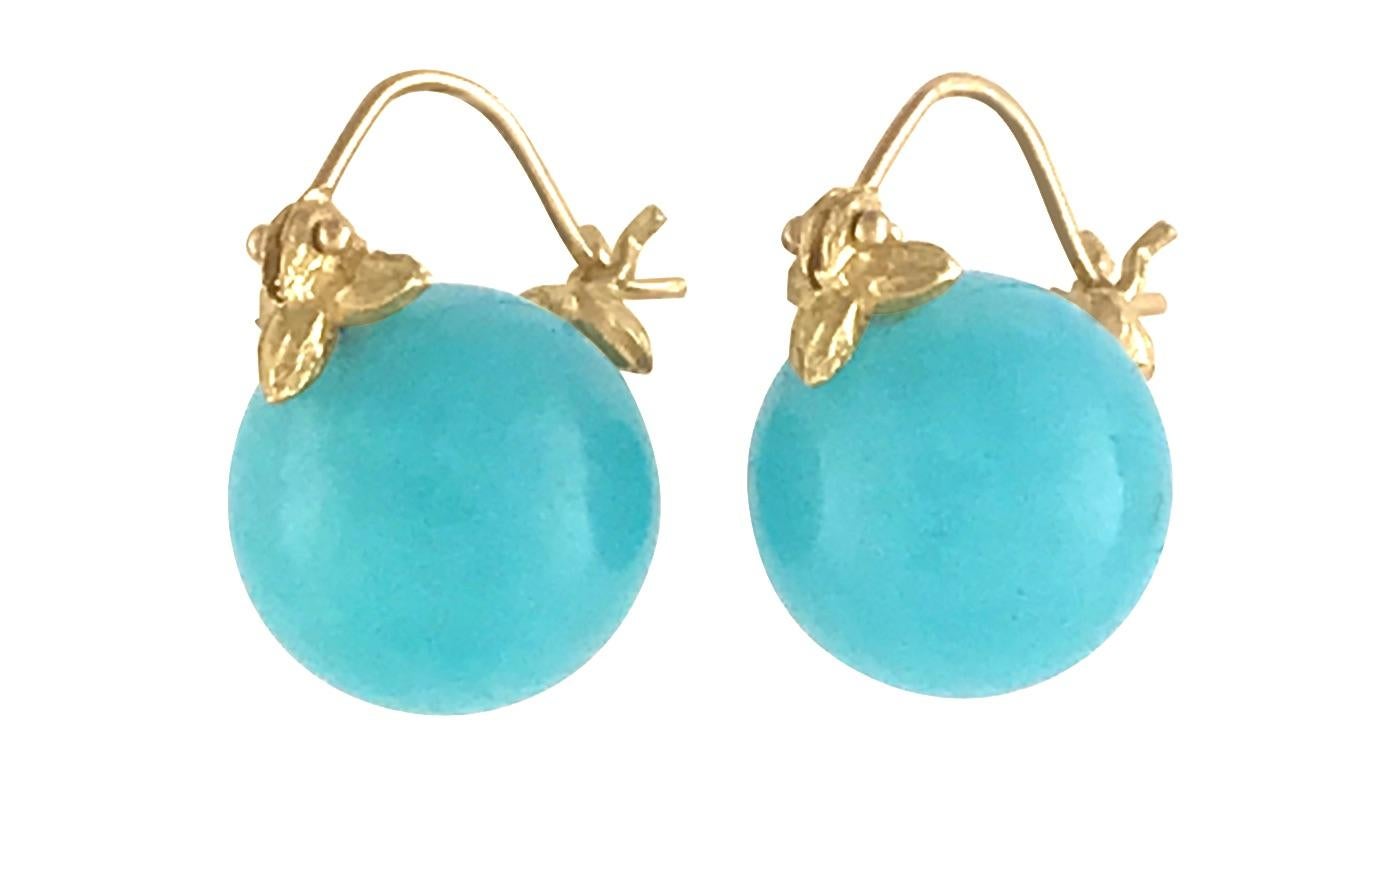 Amazonite is a mostly opaque stone textured with pale milky-white cloudiness or streaking ranging from light green to greenish blue to deep green/blue. This pair is a beautiful blue with natural white inclusions.